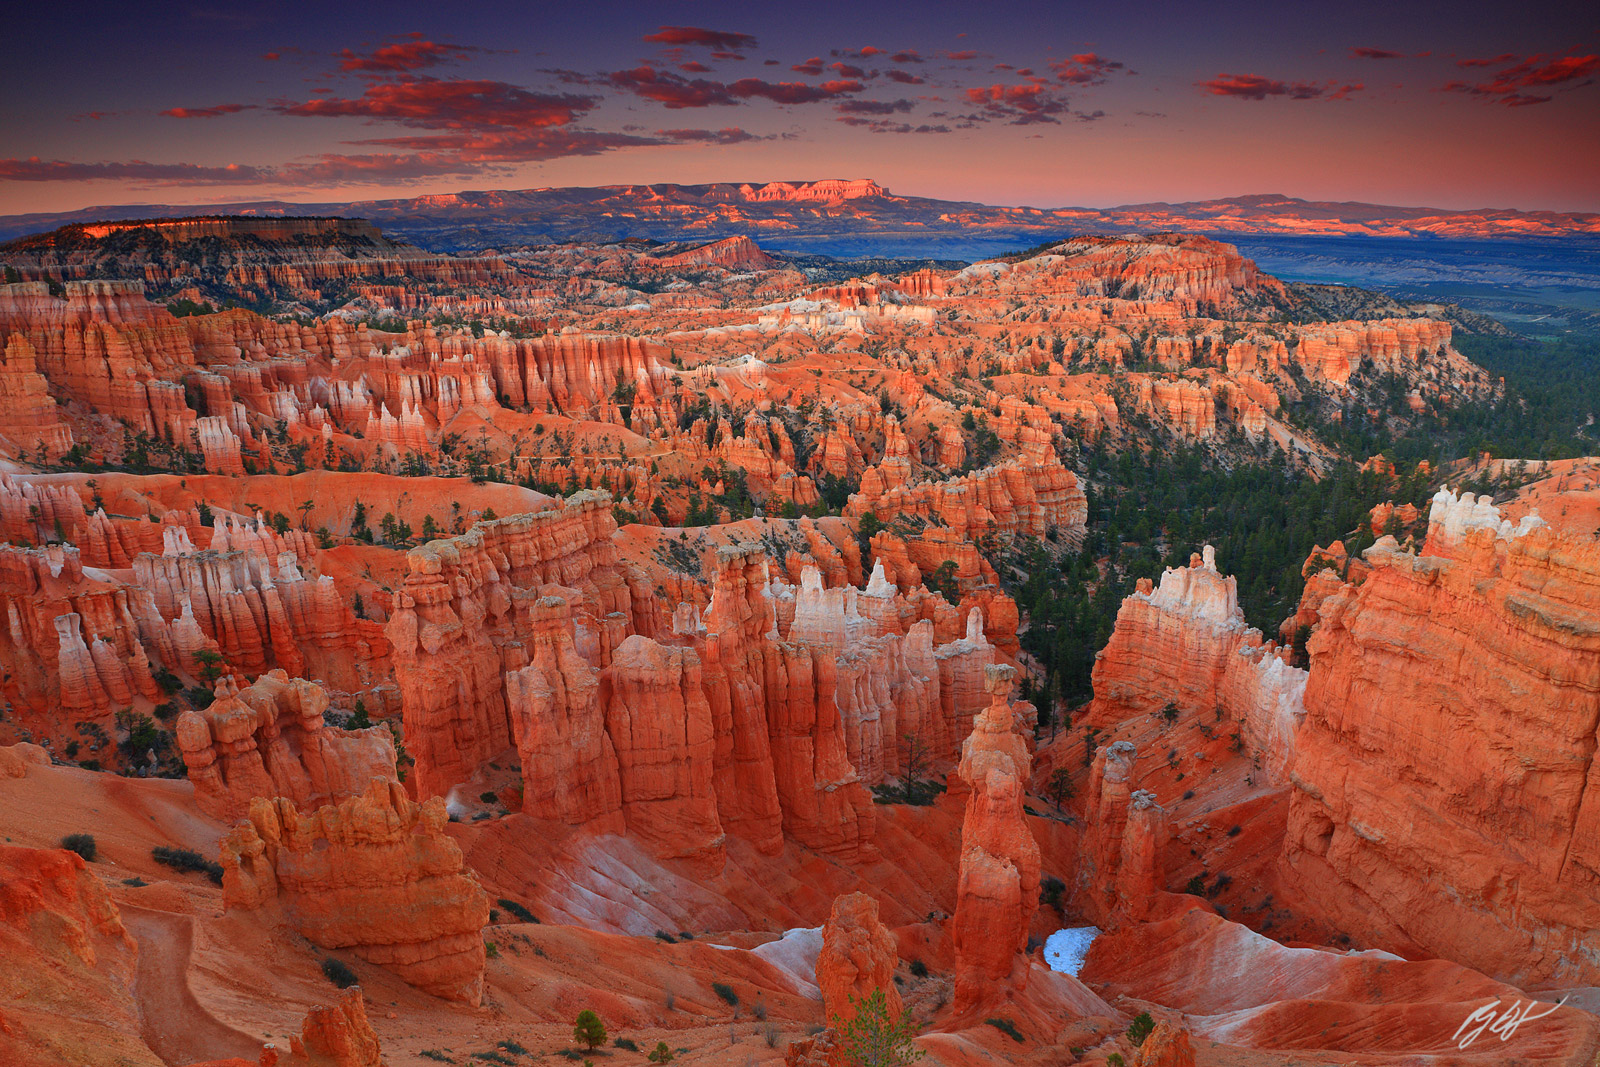 Sunset  and Hoodoos from Sunset Point in Bryce Canyon National Park in Utah